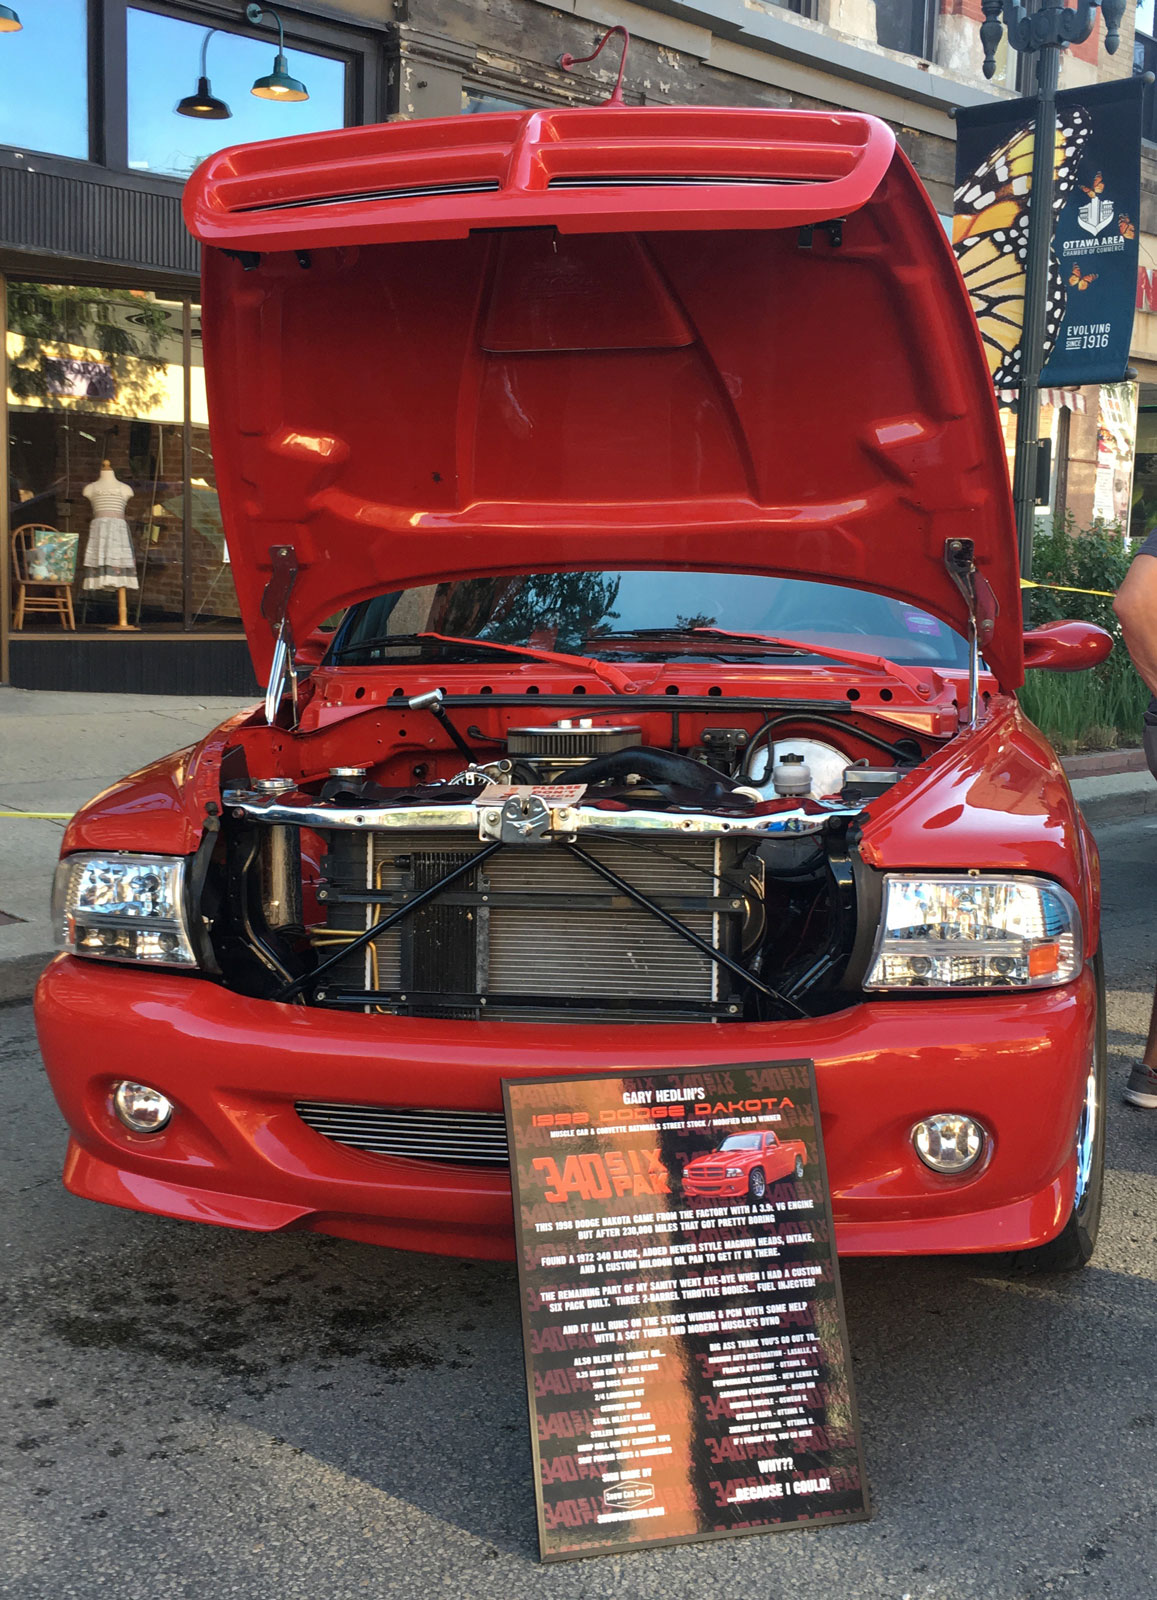 Car Show Boards - Show Boards designed for your car, truck, or bike